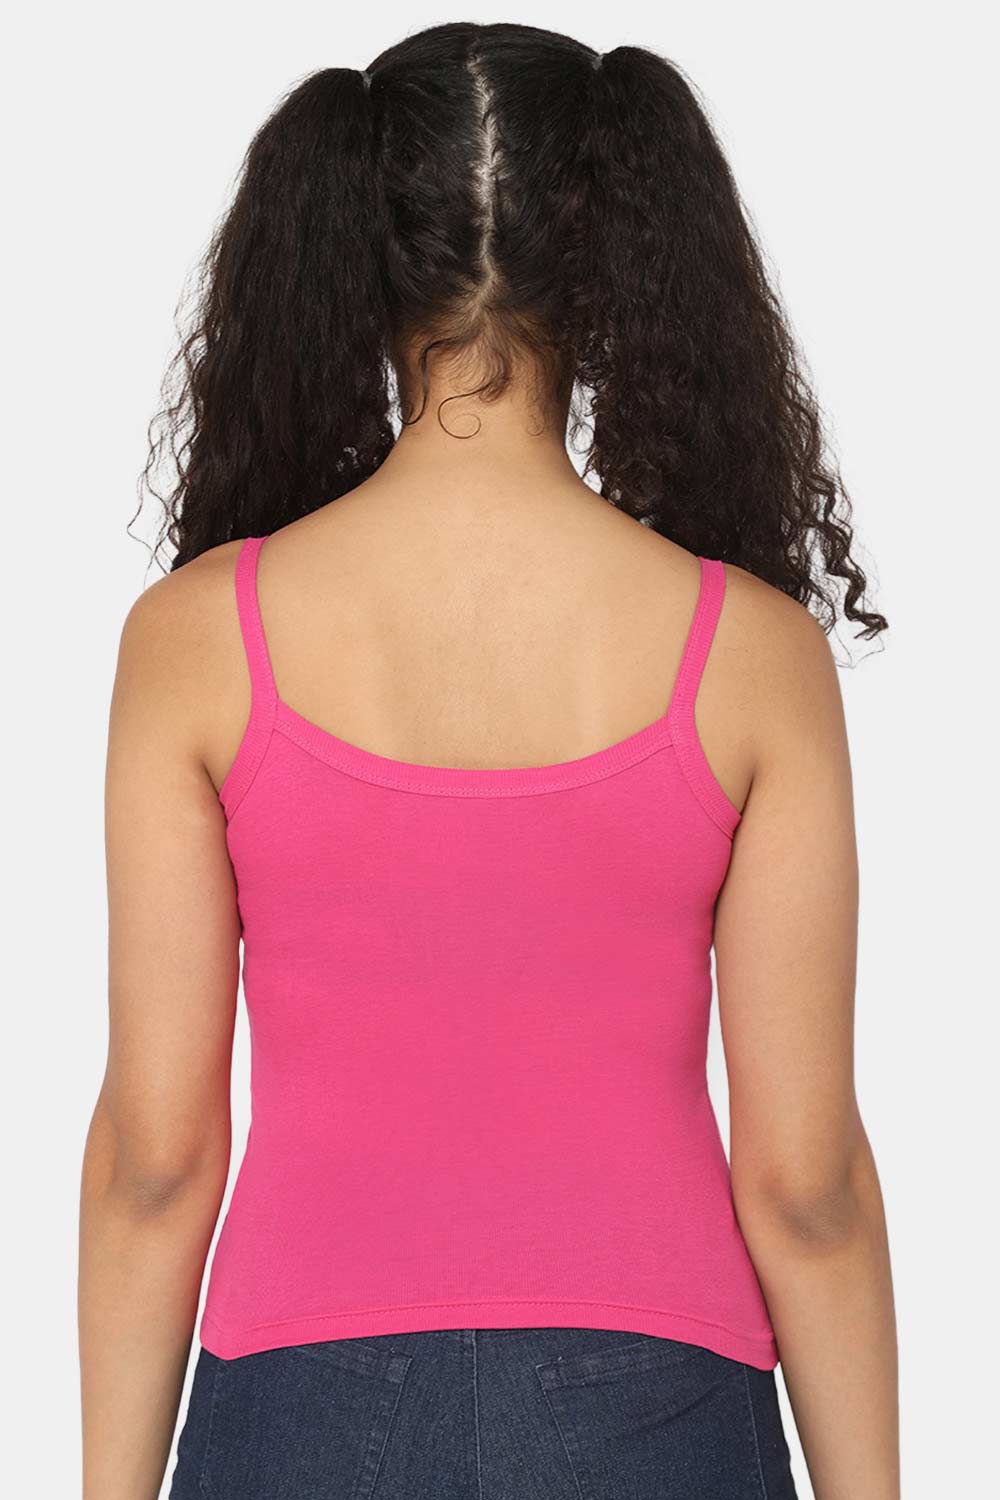 Intimacy Camisole-Slip Special Combo Pack - In01 - Pack of 3 - C38